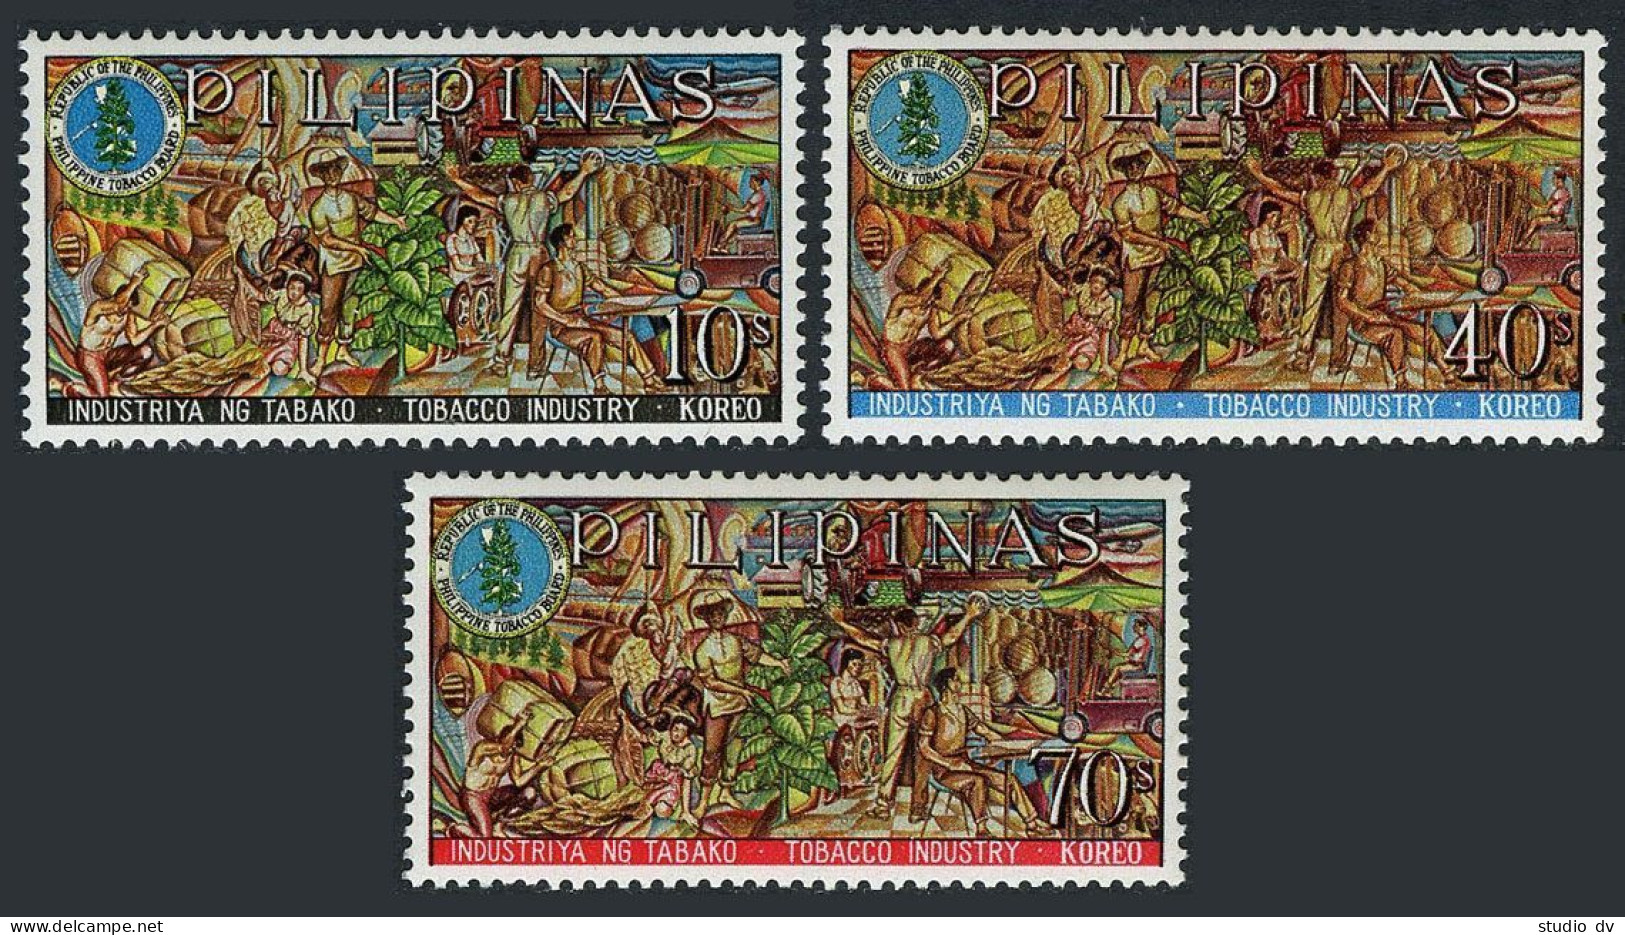 Philippines 993-995,MNH.Michel 853-855. Tobacco Industry,Board's Emblem,1968. - Philippines